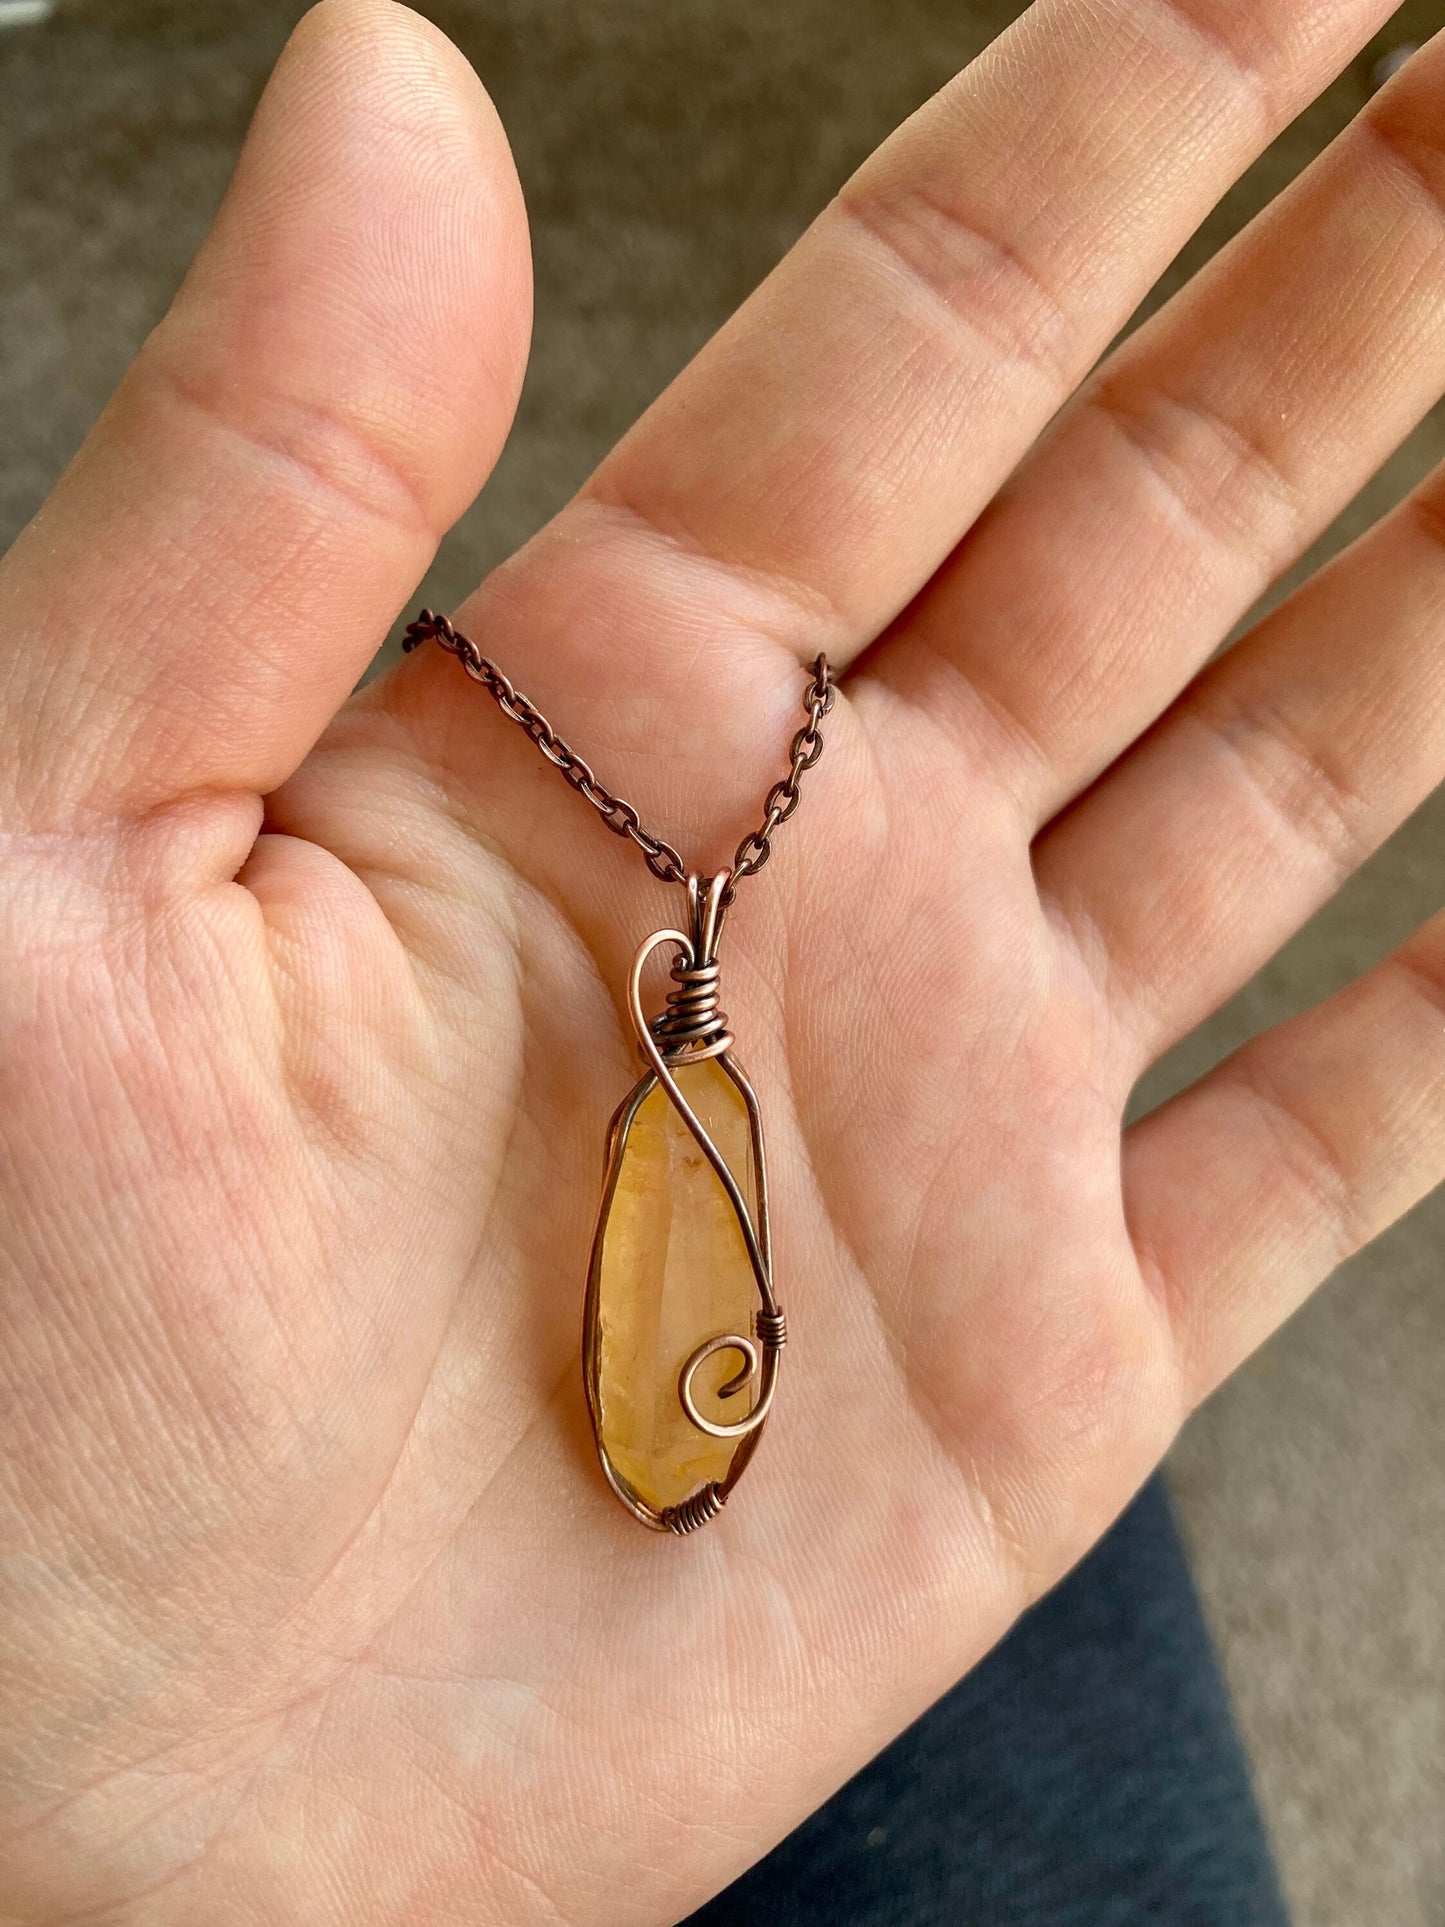 Tangerine Quartz pendant handmade necklace wire wrapped natural stone with 18 inch length chain